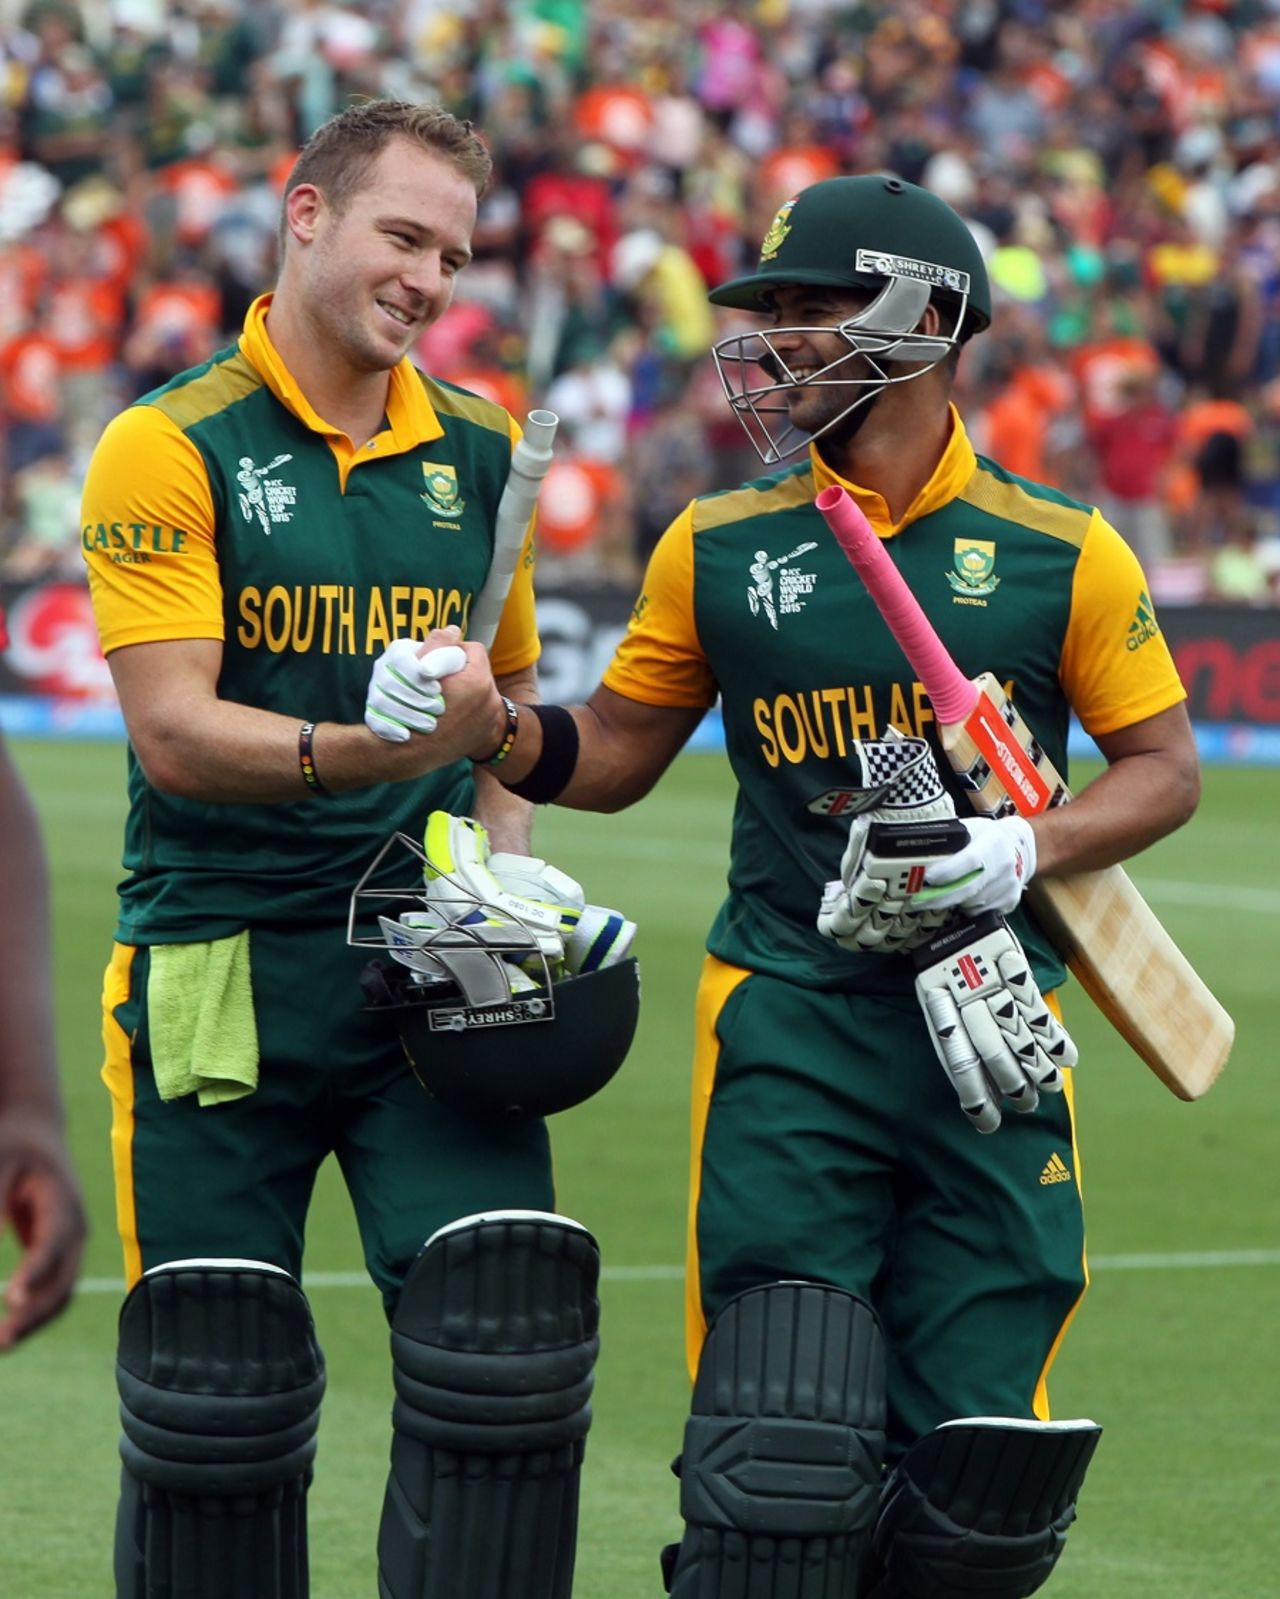 David Miller and JP Duminy starred in a world record fifth-wicket partnership of 256 off 178, South Africa v Zimbabwe, World Cup 2015, Group B, Hamilton, February 15, 2015